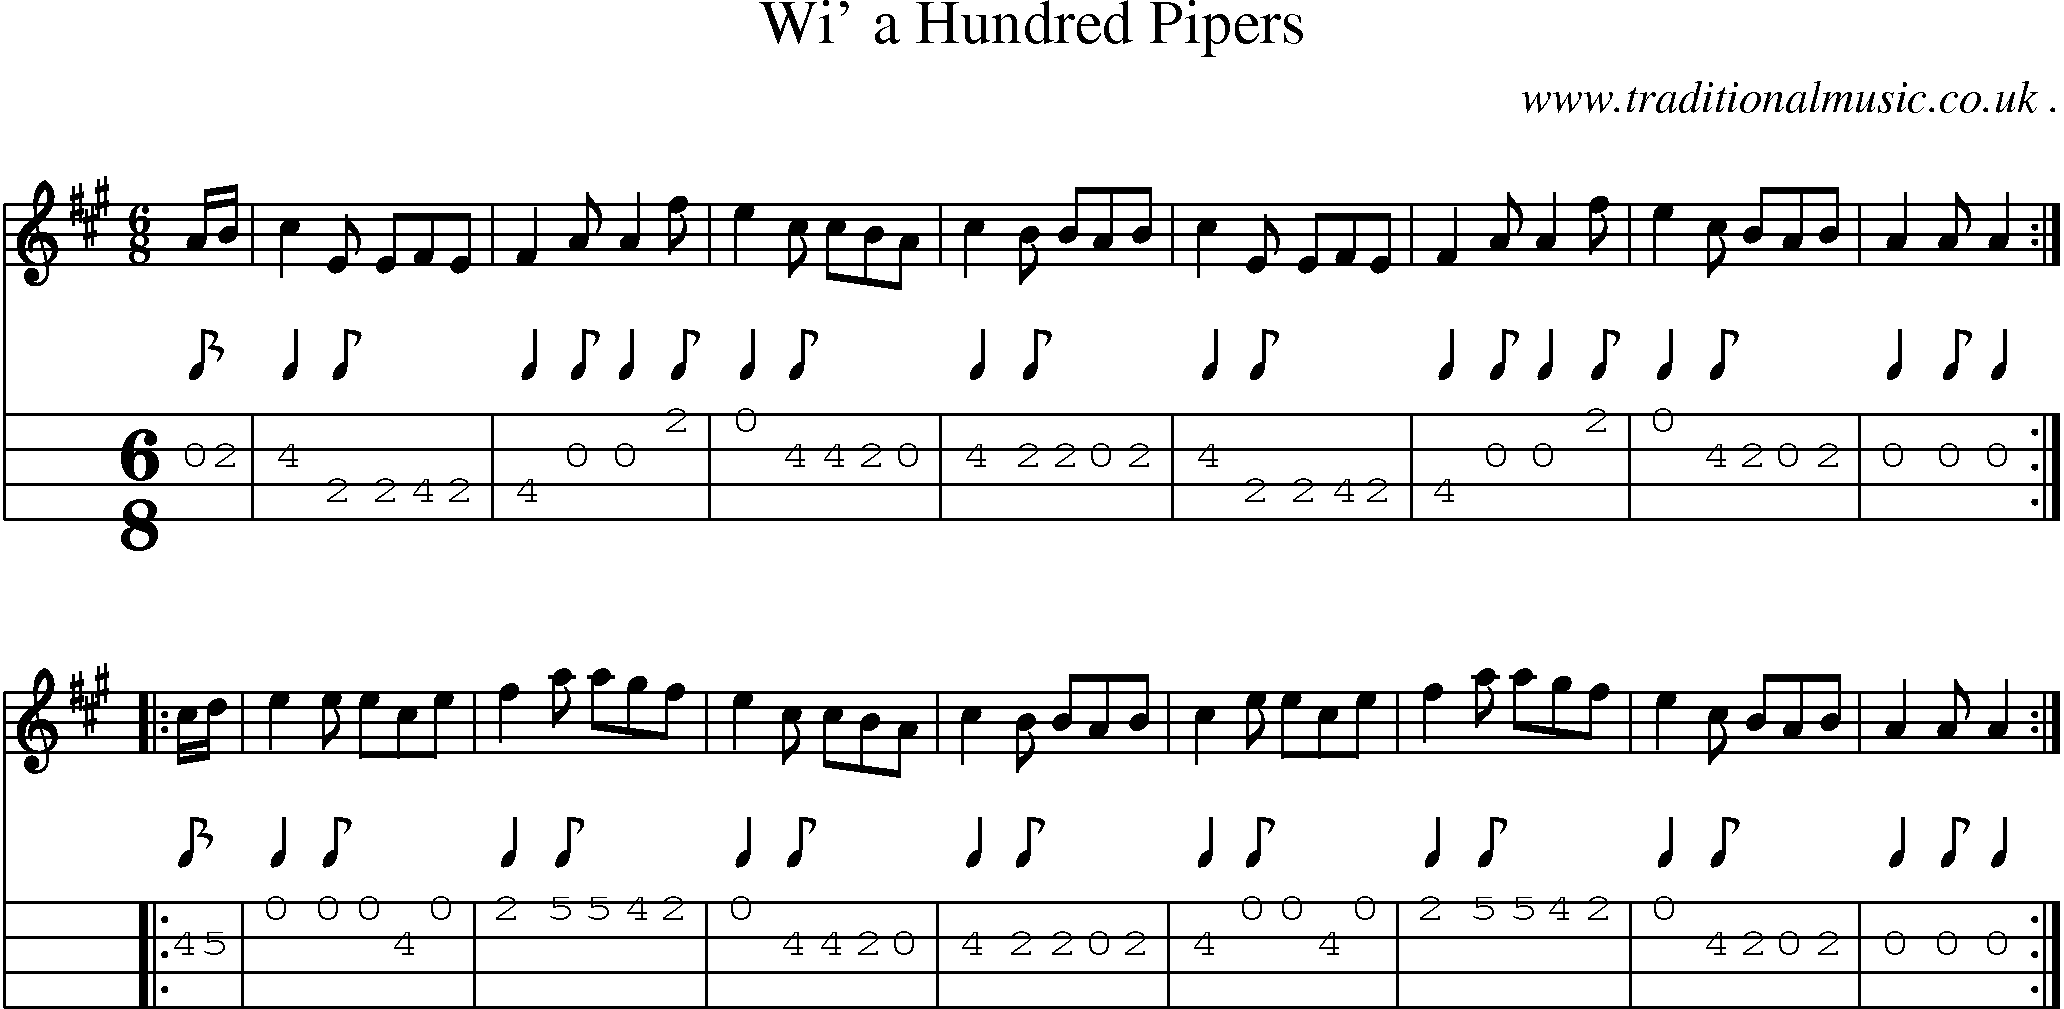 Sheet-music  score, Chords and Mandolin Tabs for Wi A Hundred Pipers1